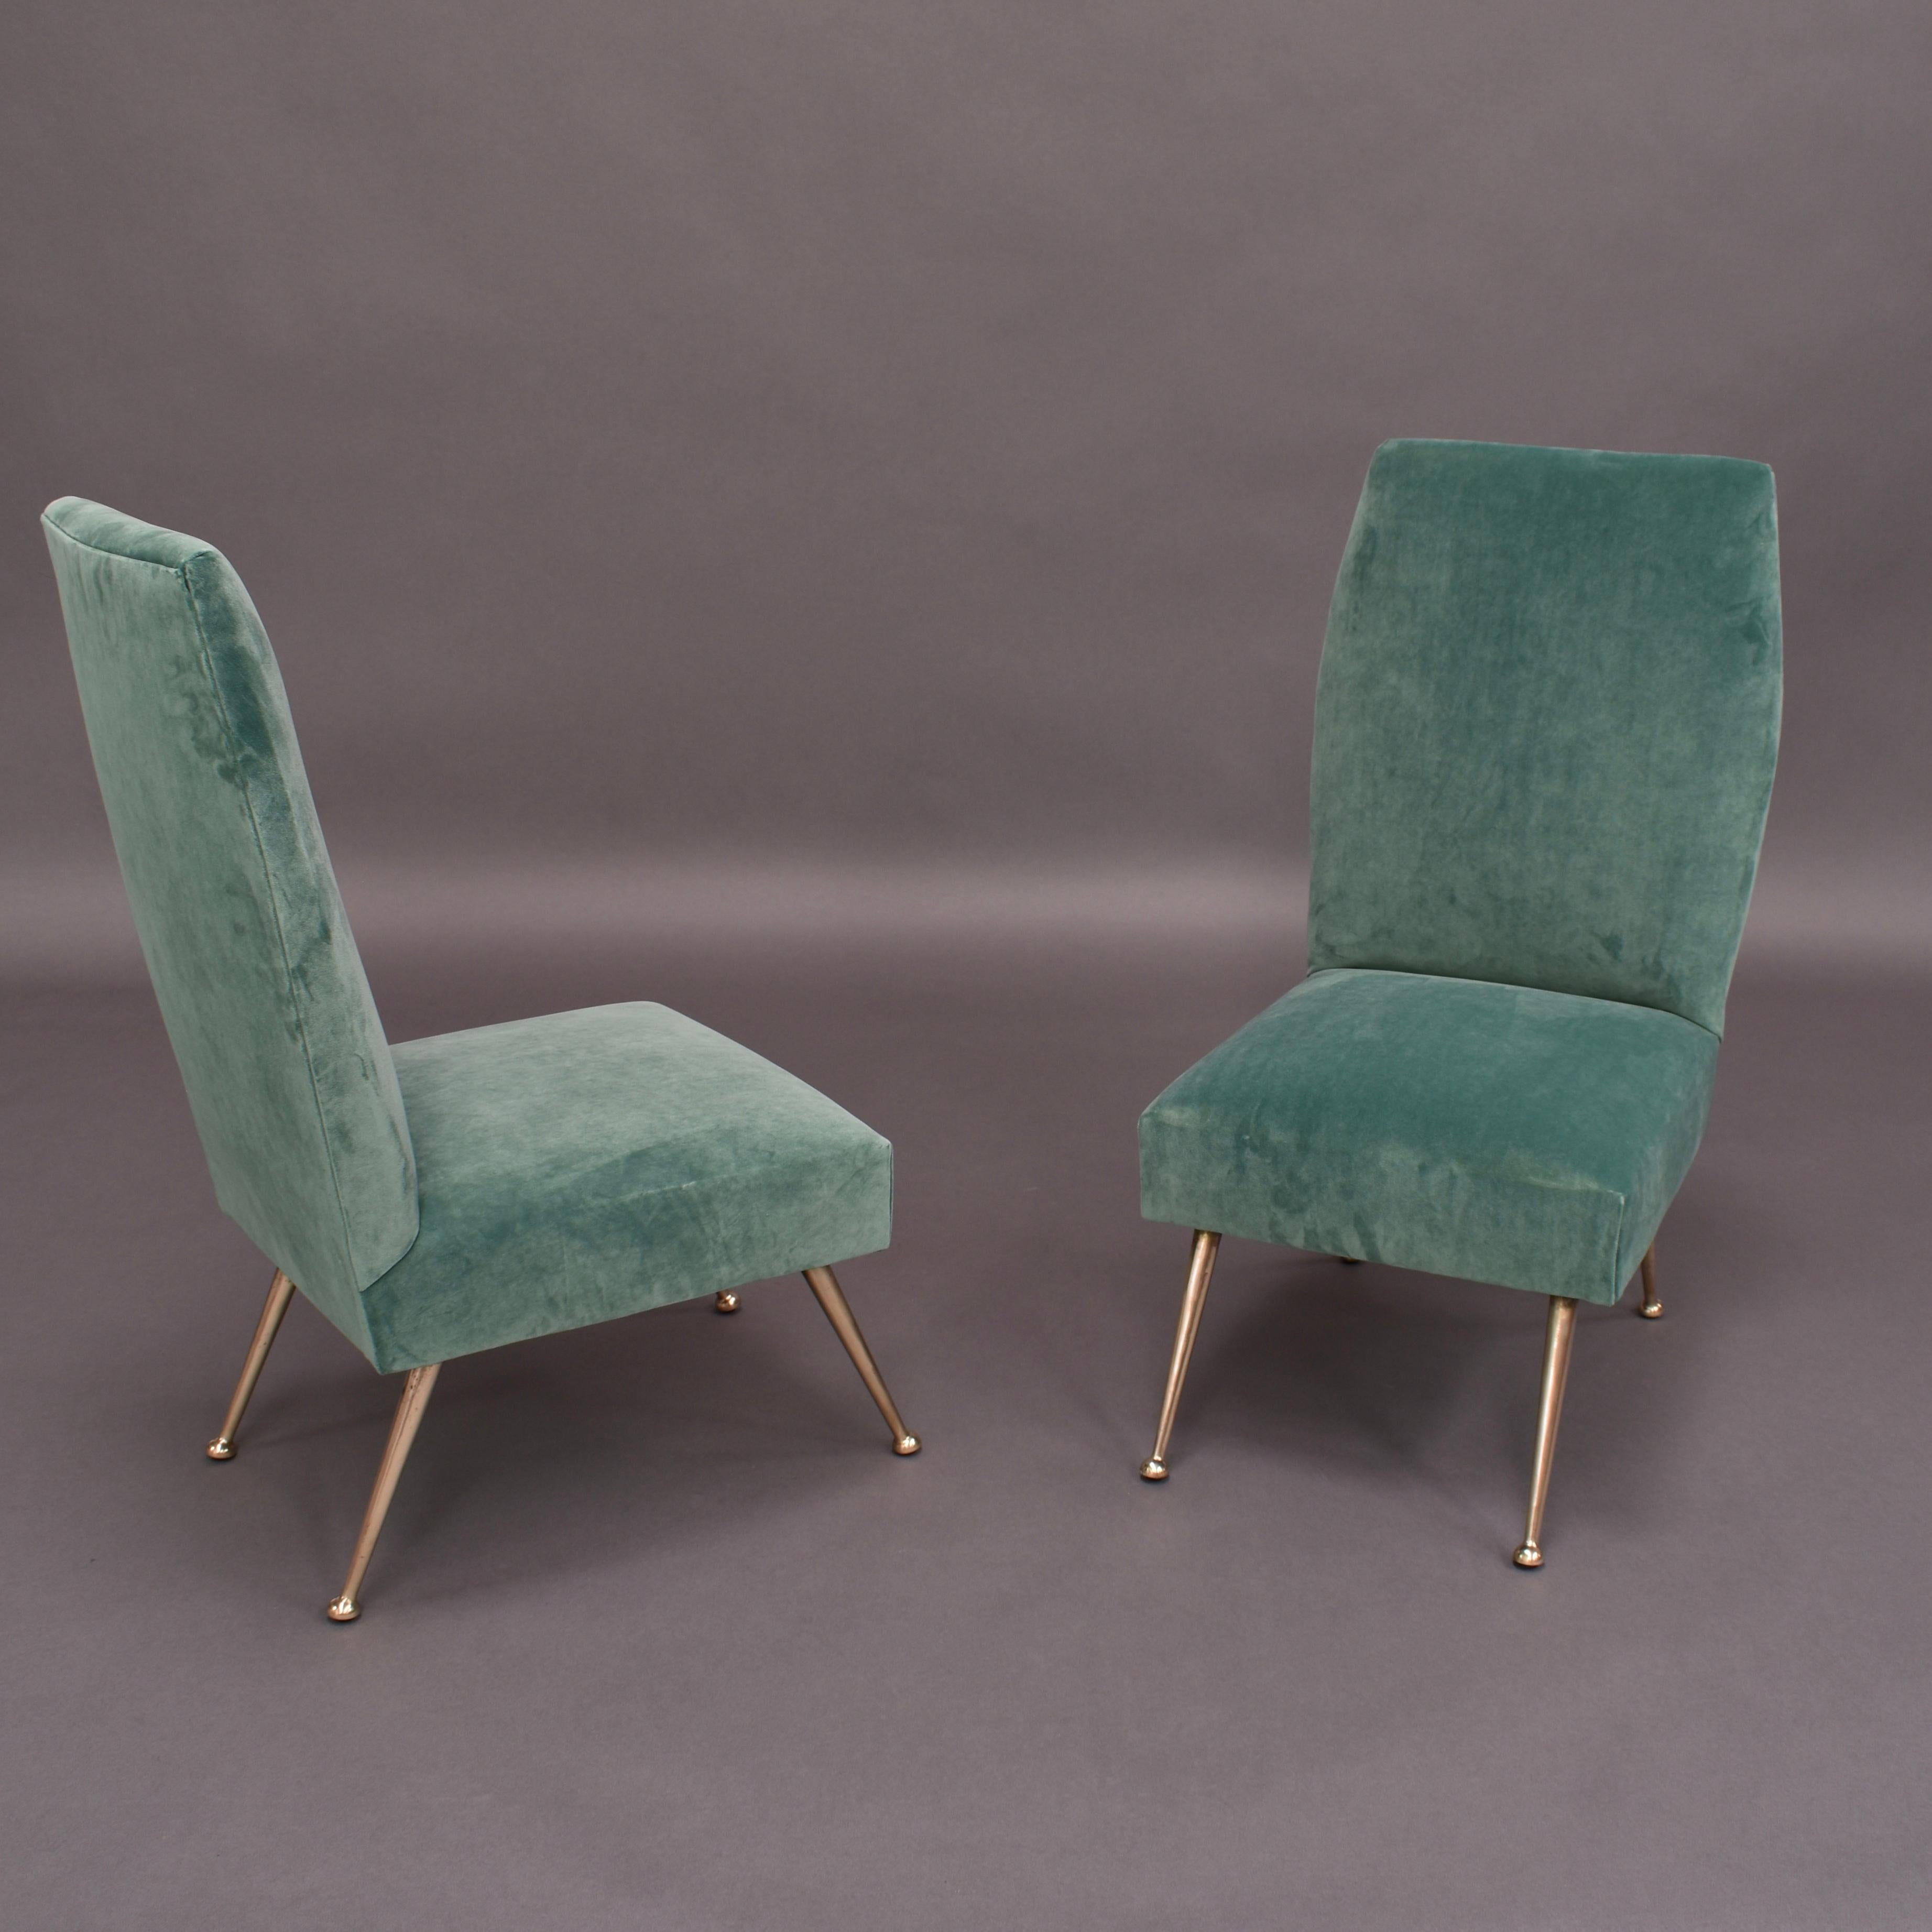 Amazing elegant and trendy pair of side chairs by Gigi Radice for Minotti, Italy, 1950s.
The chairs have been reupholstered in a new velvet fabric by Chivasso (JAB). The chairs have been used for the 2020 marketing images of Chivasso, so this is a